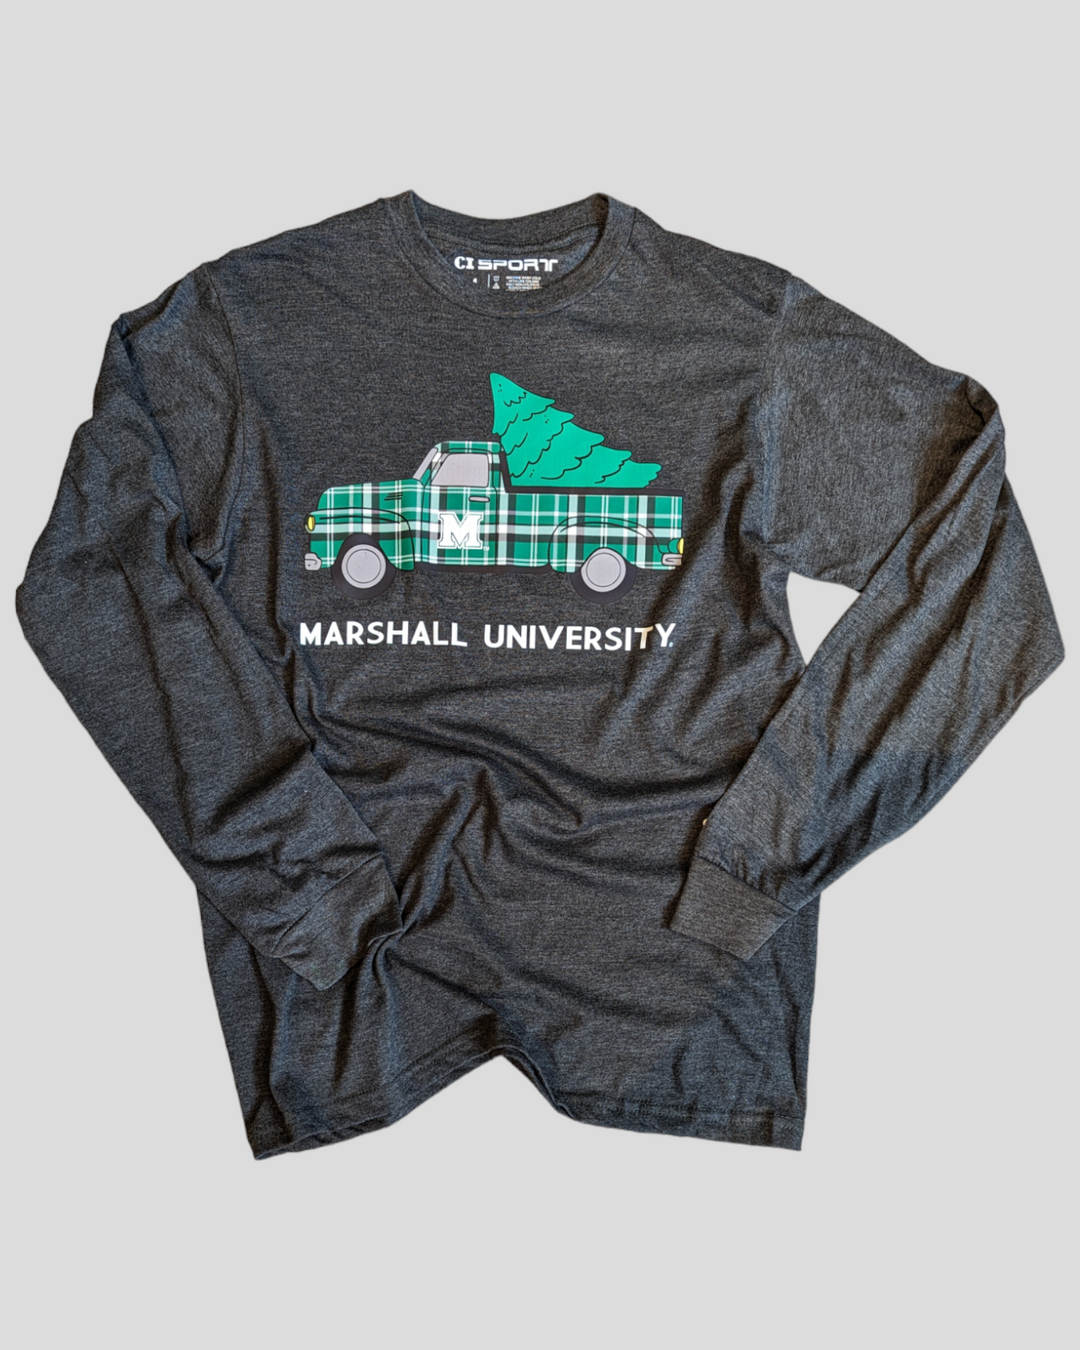 a flat lay shot of the holiday truck tee showing the design on the front of a plaid truck hauling a green christmas tree with Marshall University in block lettering underneath.